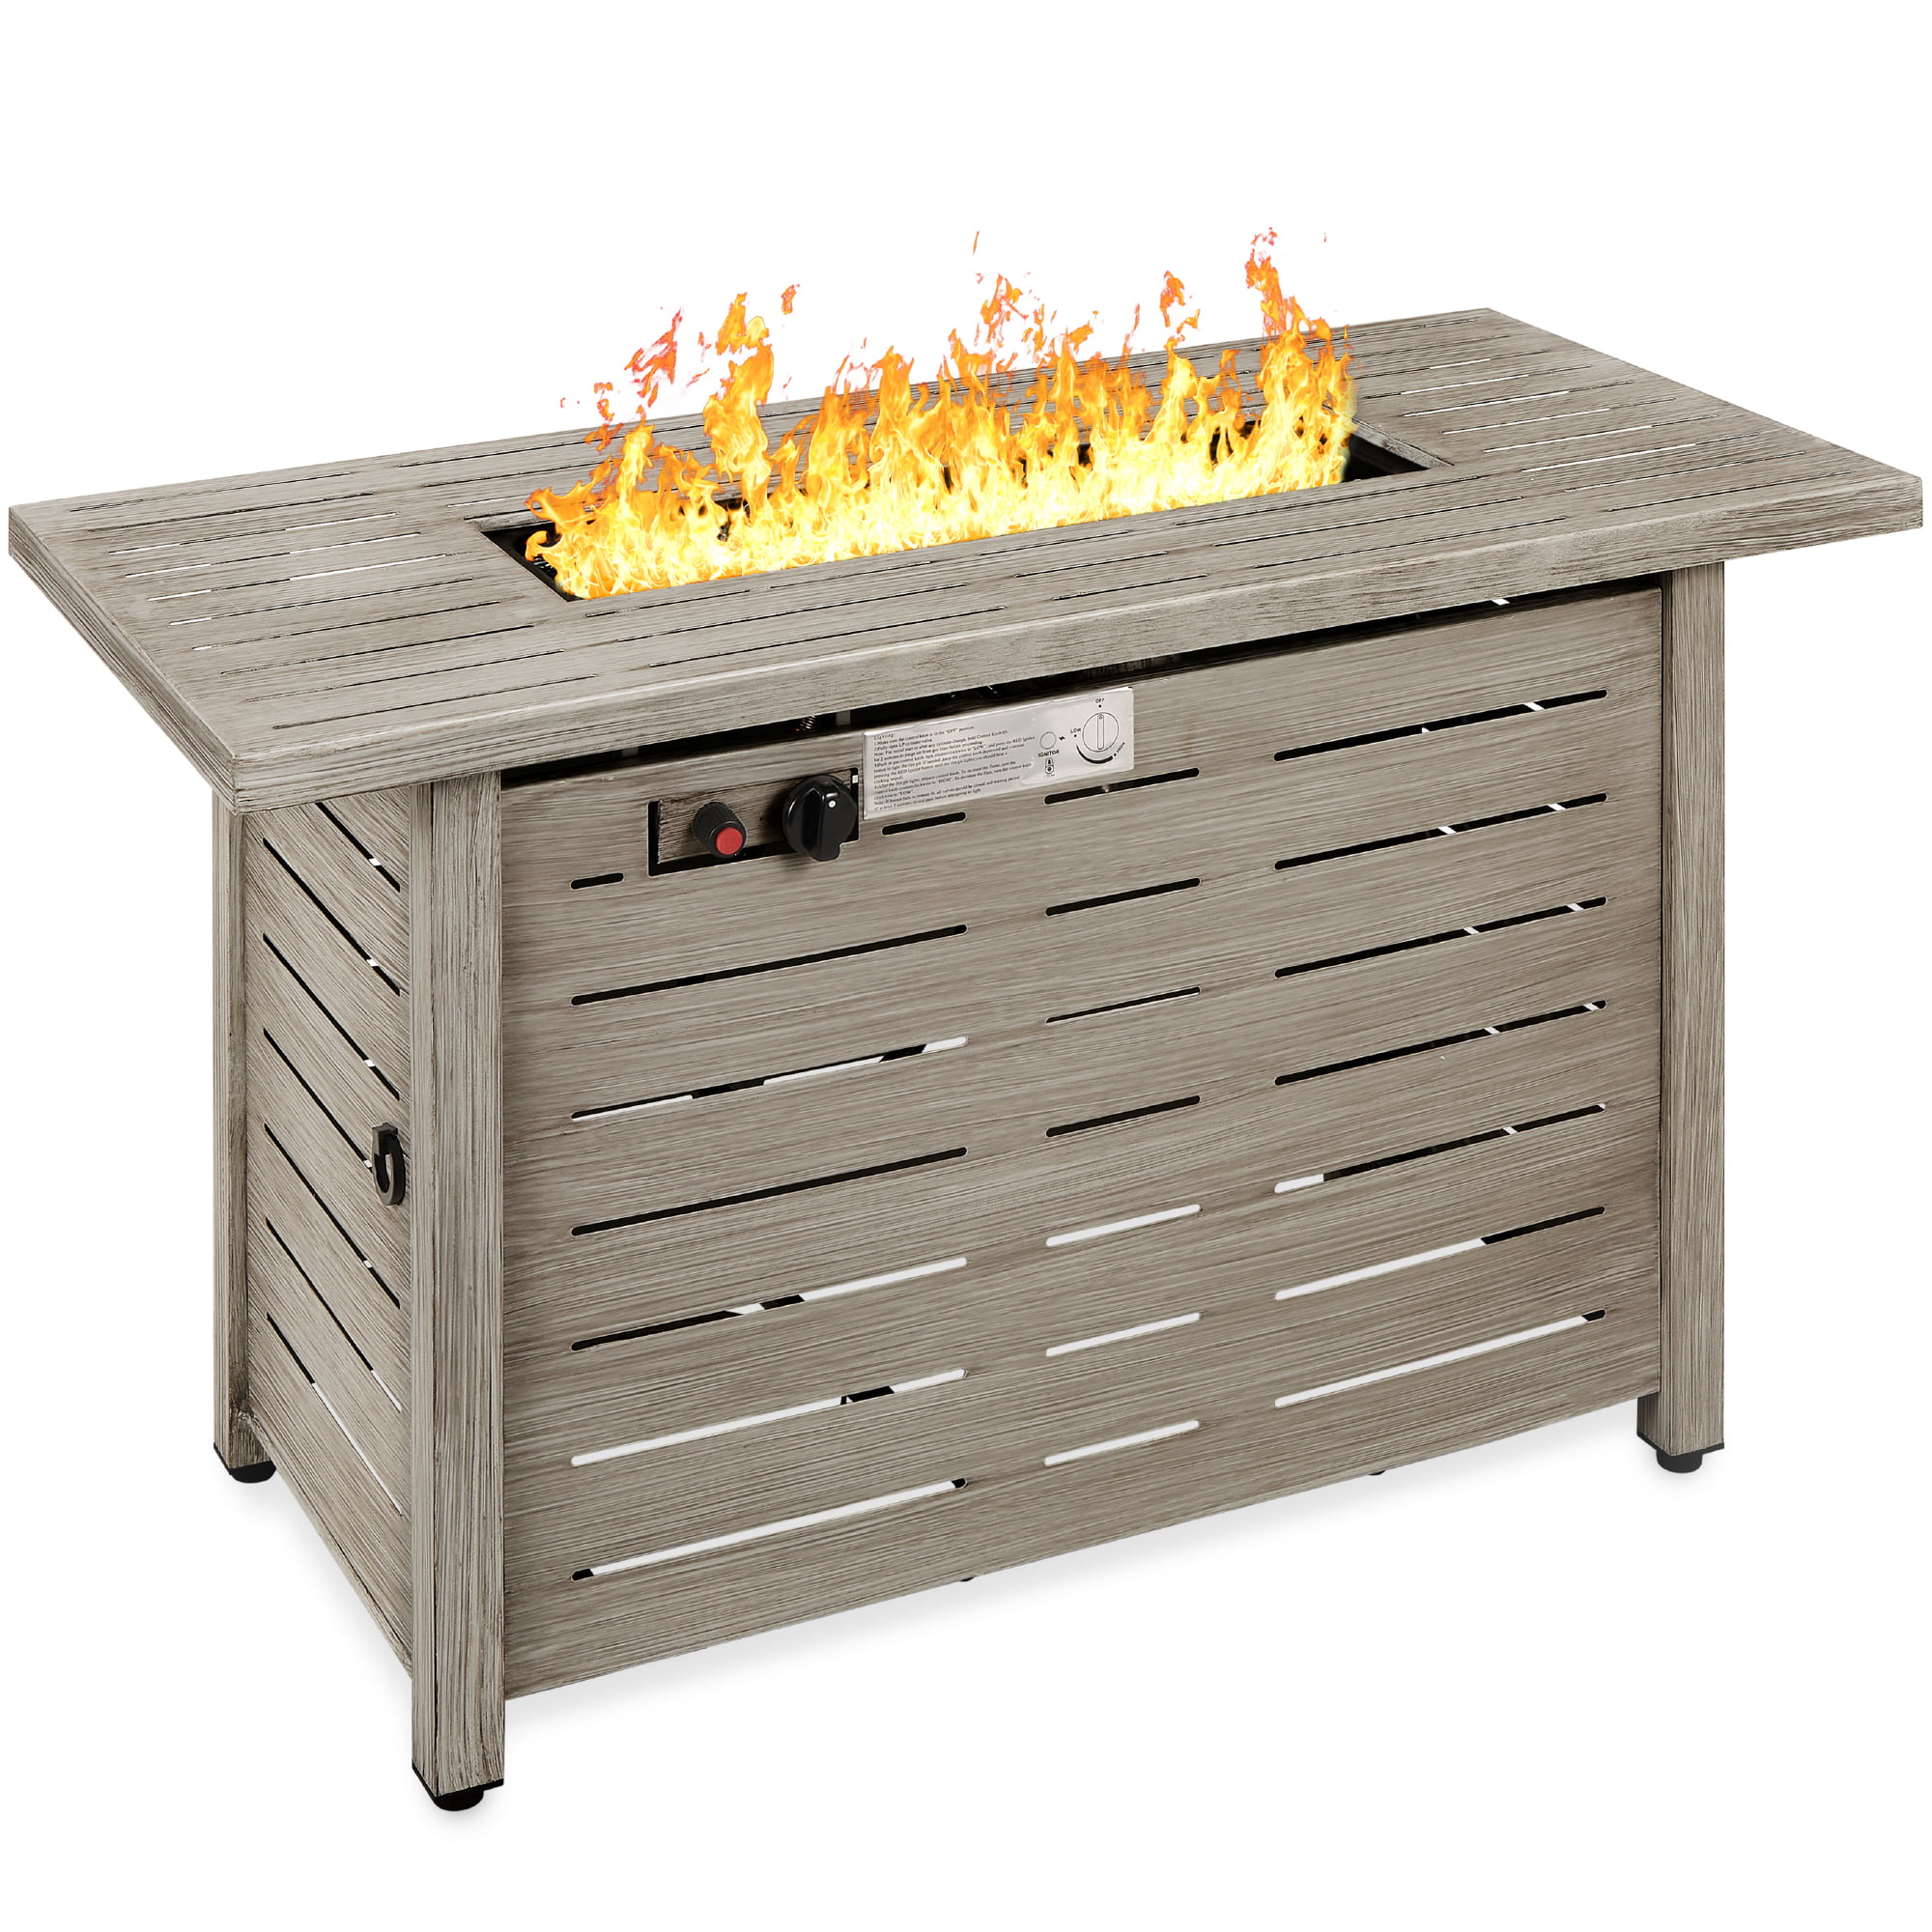 Fire Pit Table, Red Ember Willow Fire Pit